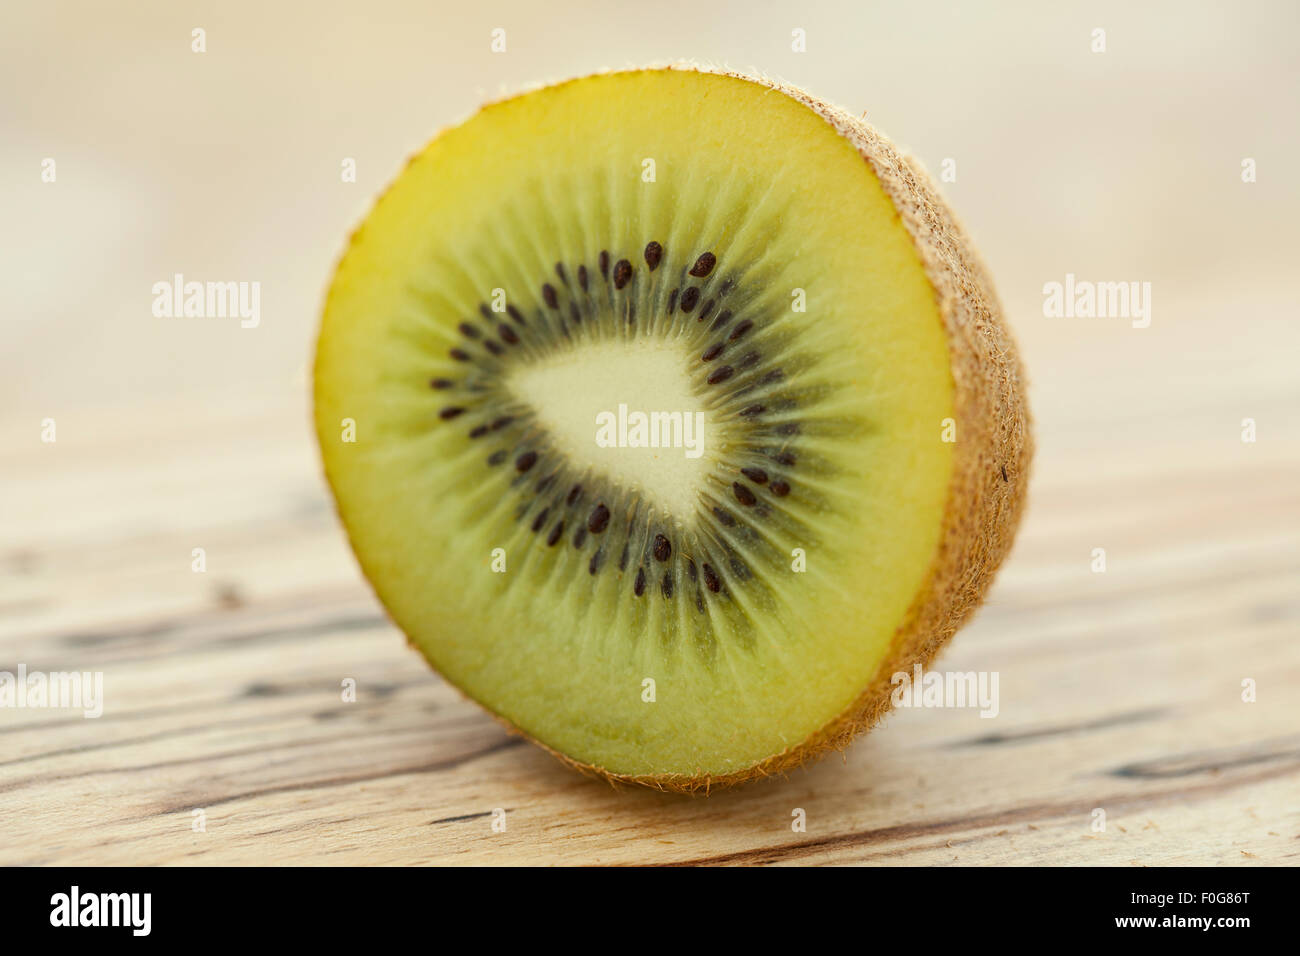 A sliced kiwifruit or kiwi on a wooden surface photographed with window light. Stock Photo